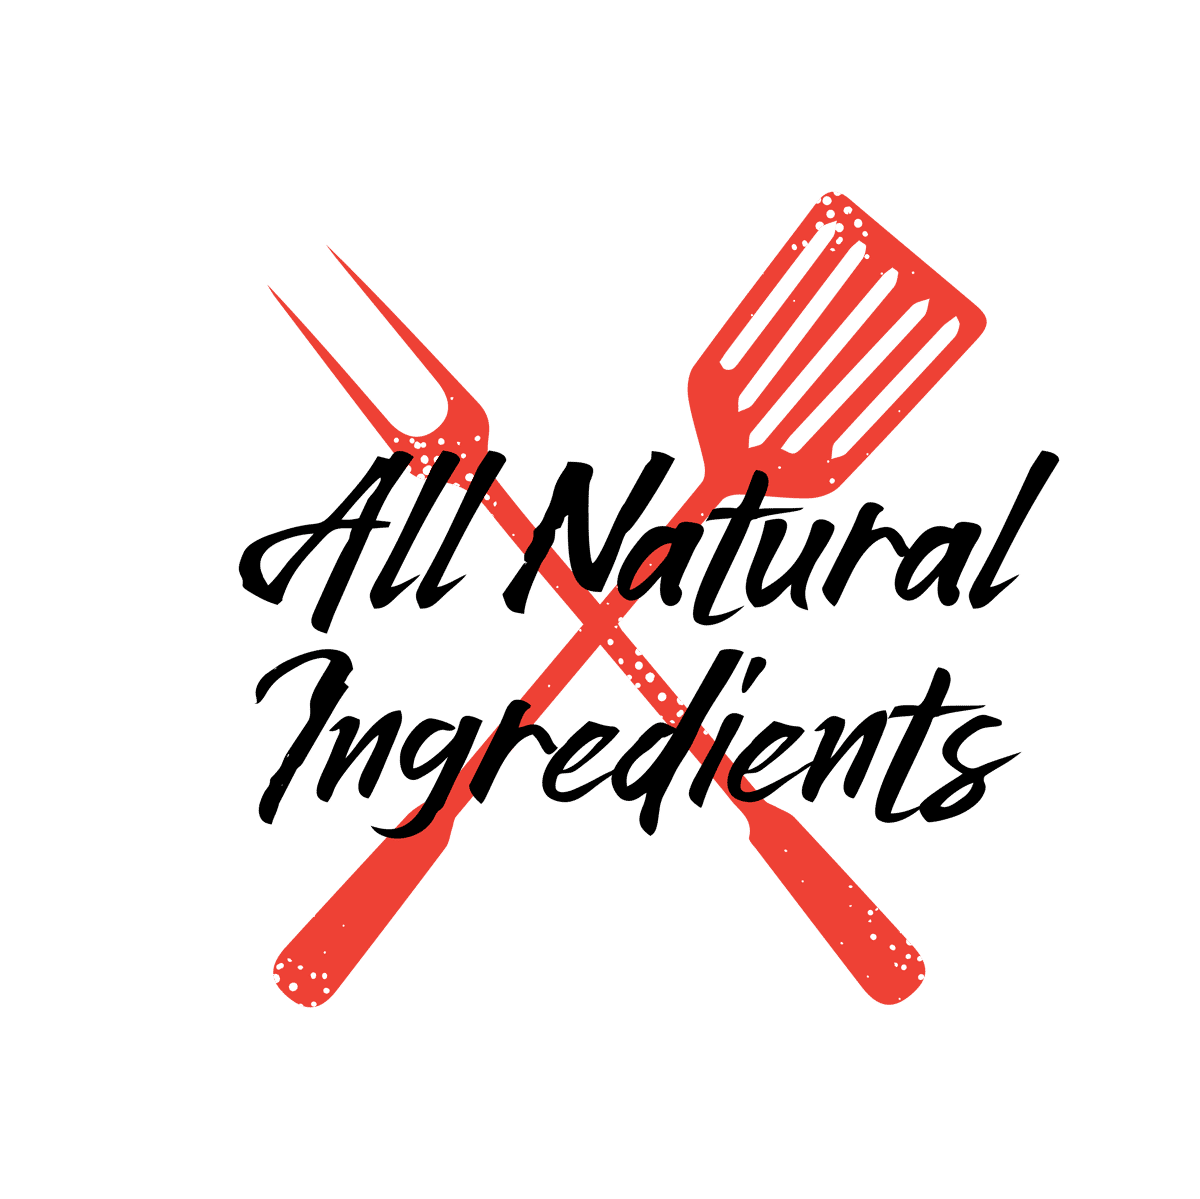 All Natural Ingredients